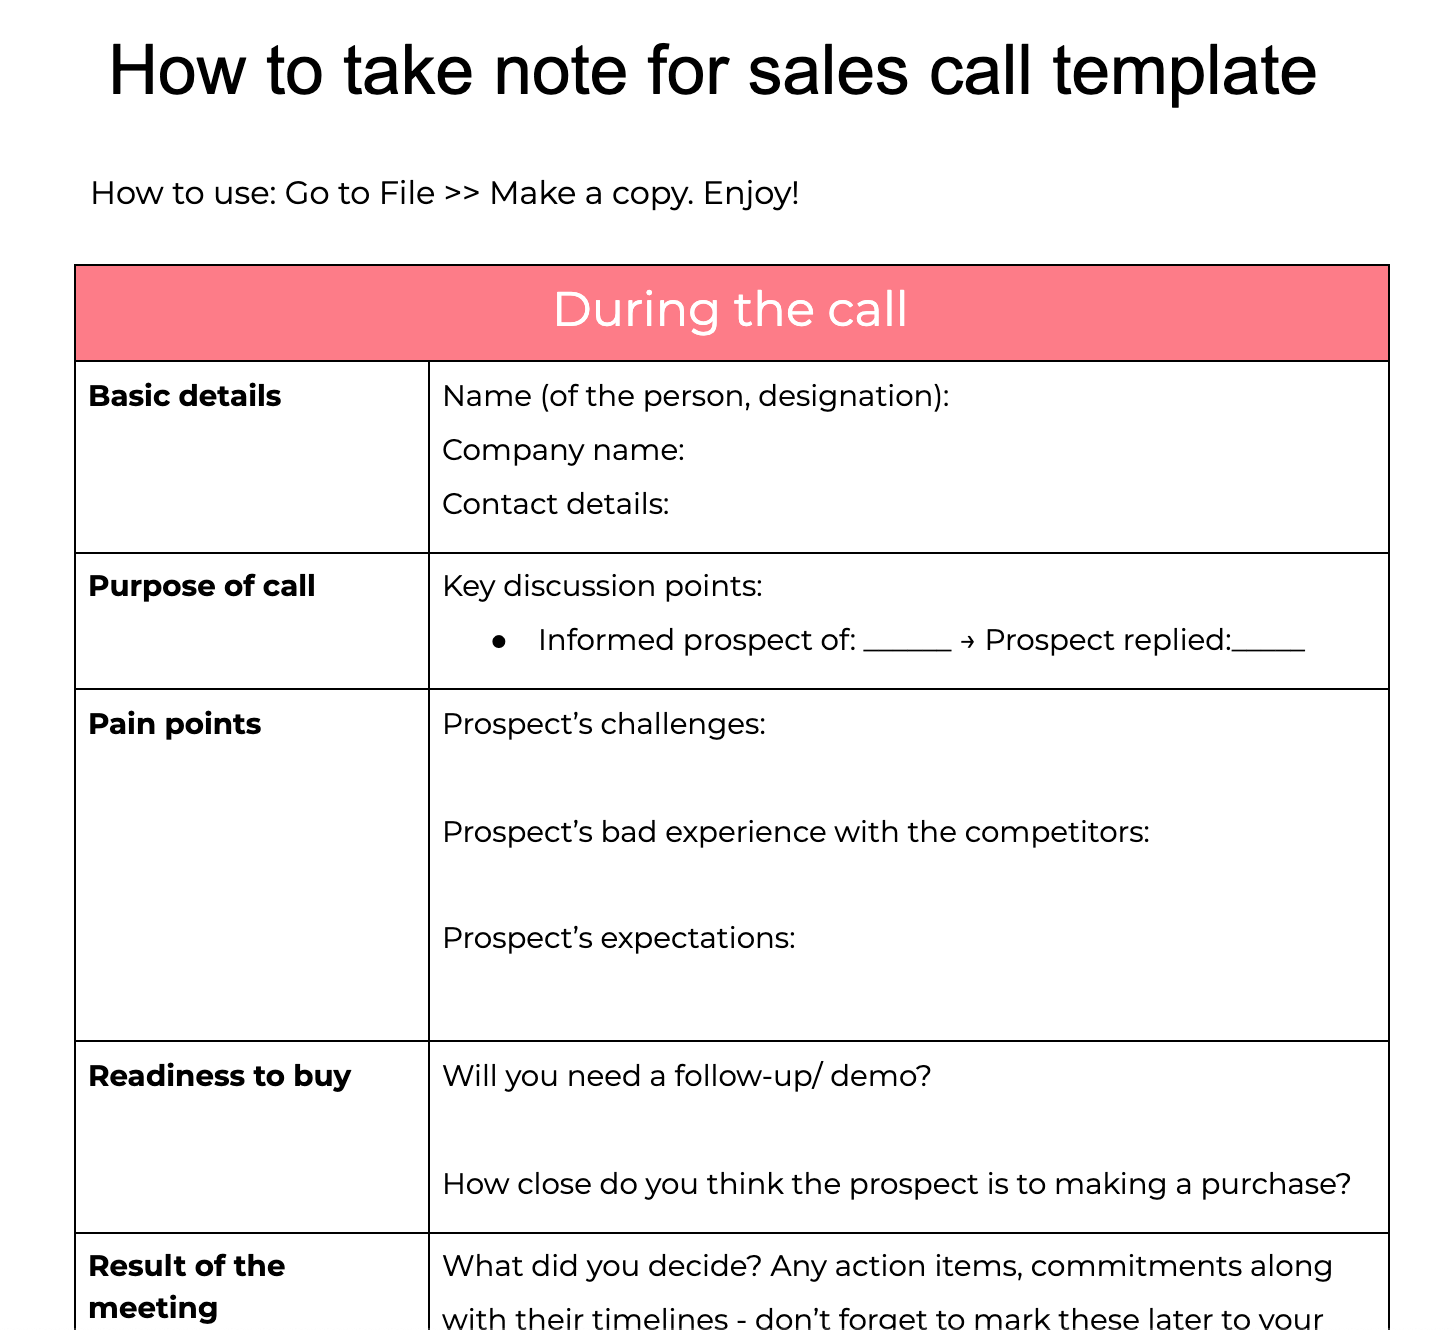 5 Must know Tips to Make Sales Call Notes Work for Your Deals